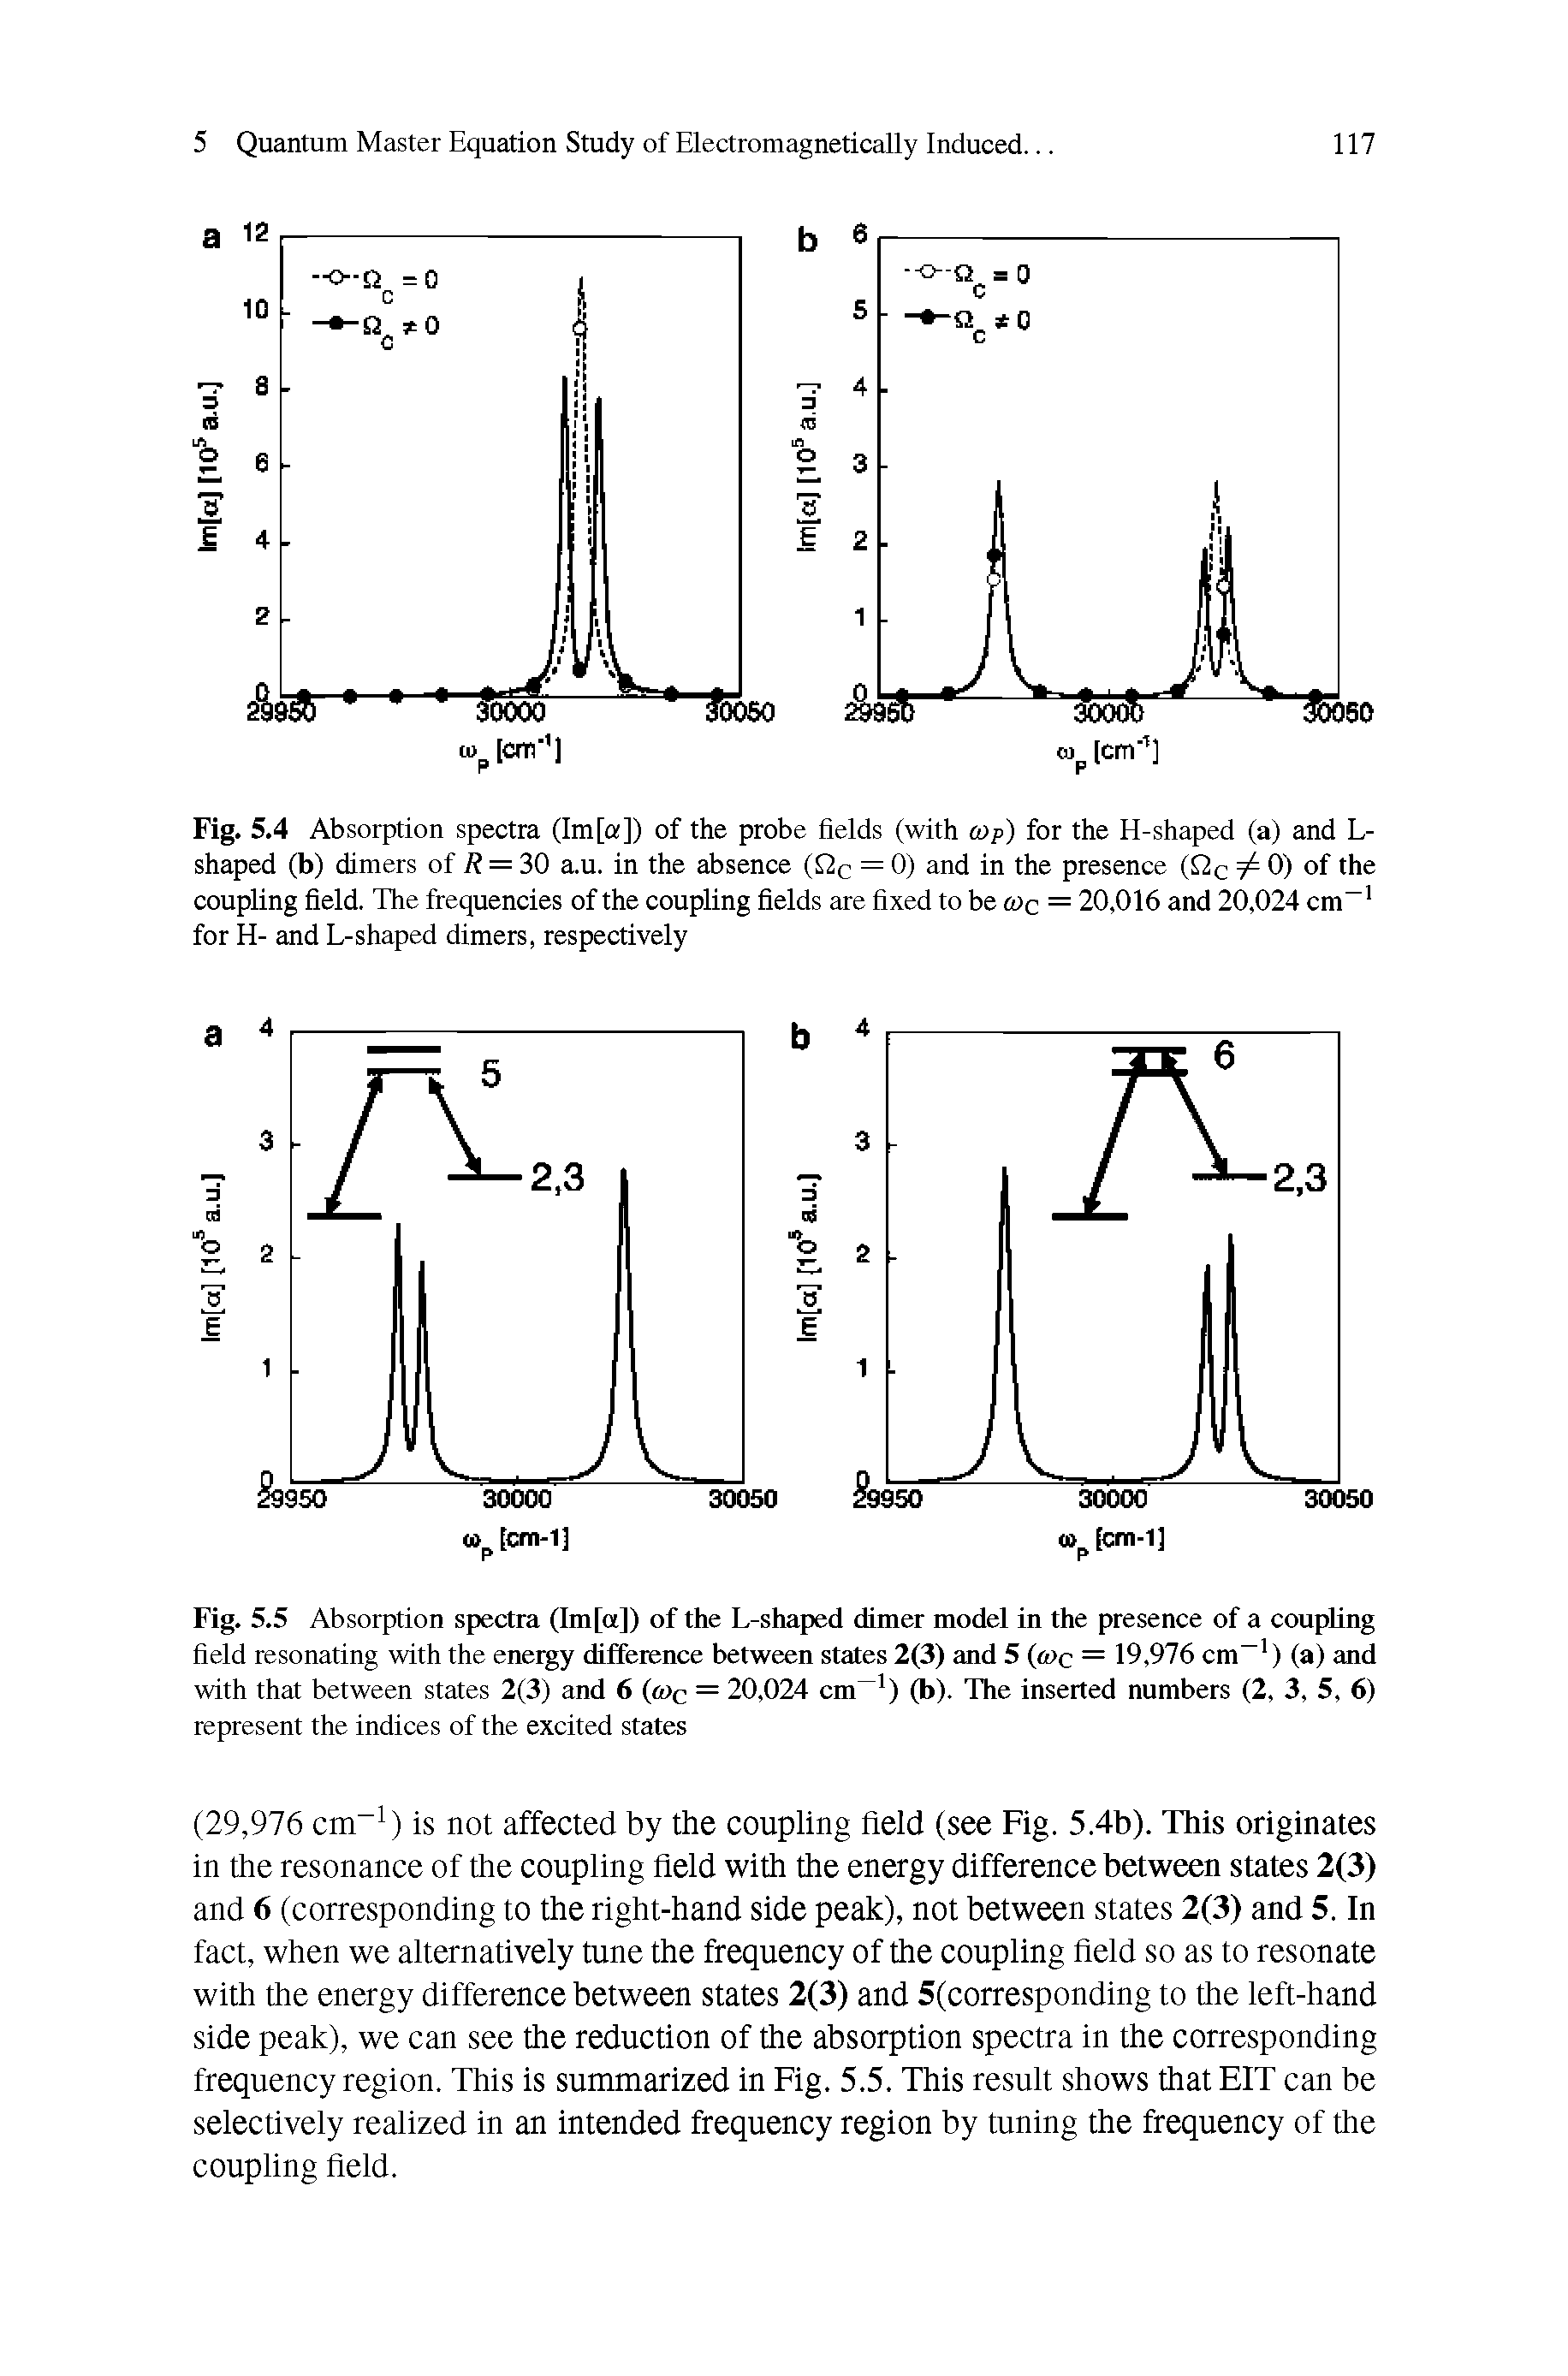 Fig. 5.5 Absorption spectra (Im[a]) of the L-shaped dimer model in the presence of a coupling field resonating with the energy difference between states 2(3) and 5 (tuc = 19,976 cm ) (a) and with that between states 2(3) and 6 (tuc = 20,024 cm ) (b). The inserted numbers (2, 3, 5, 6) represent the indices of the excited states...